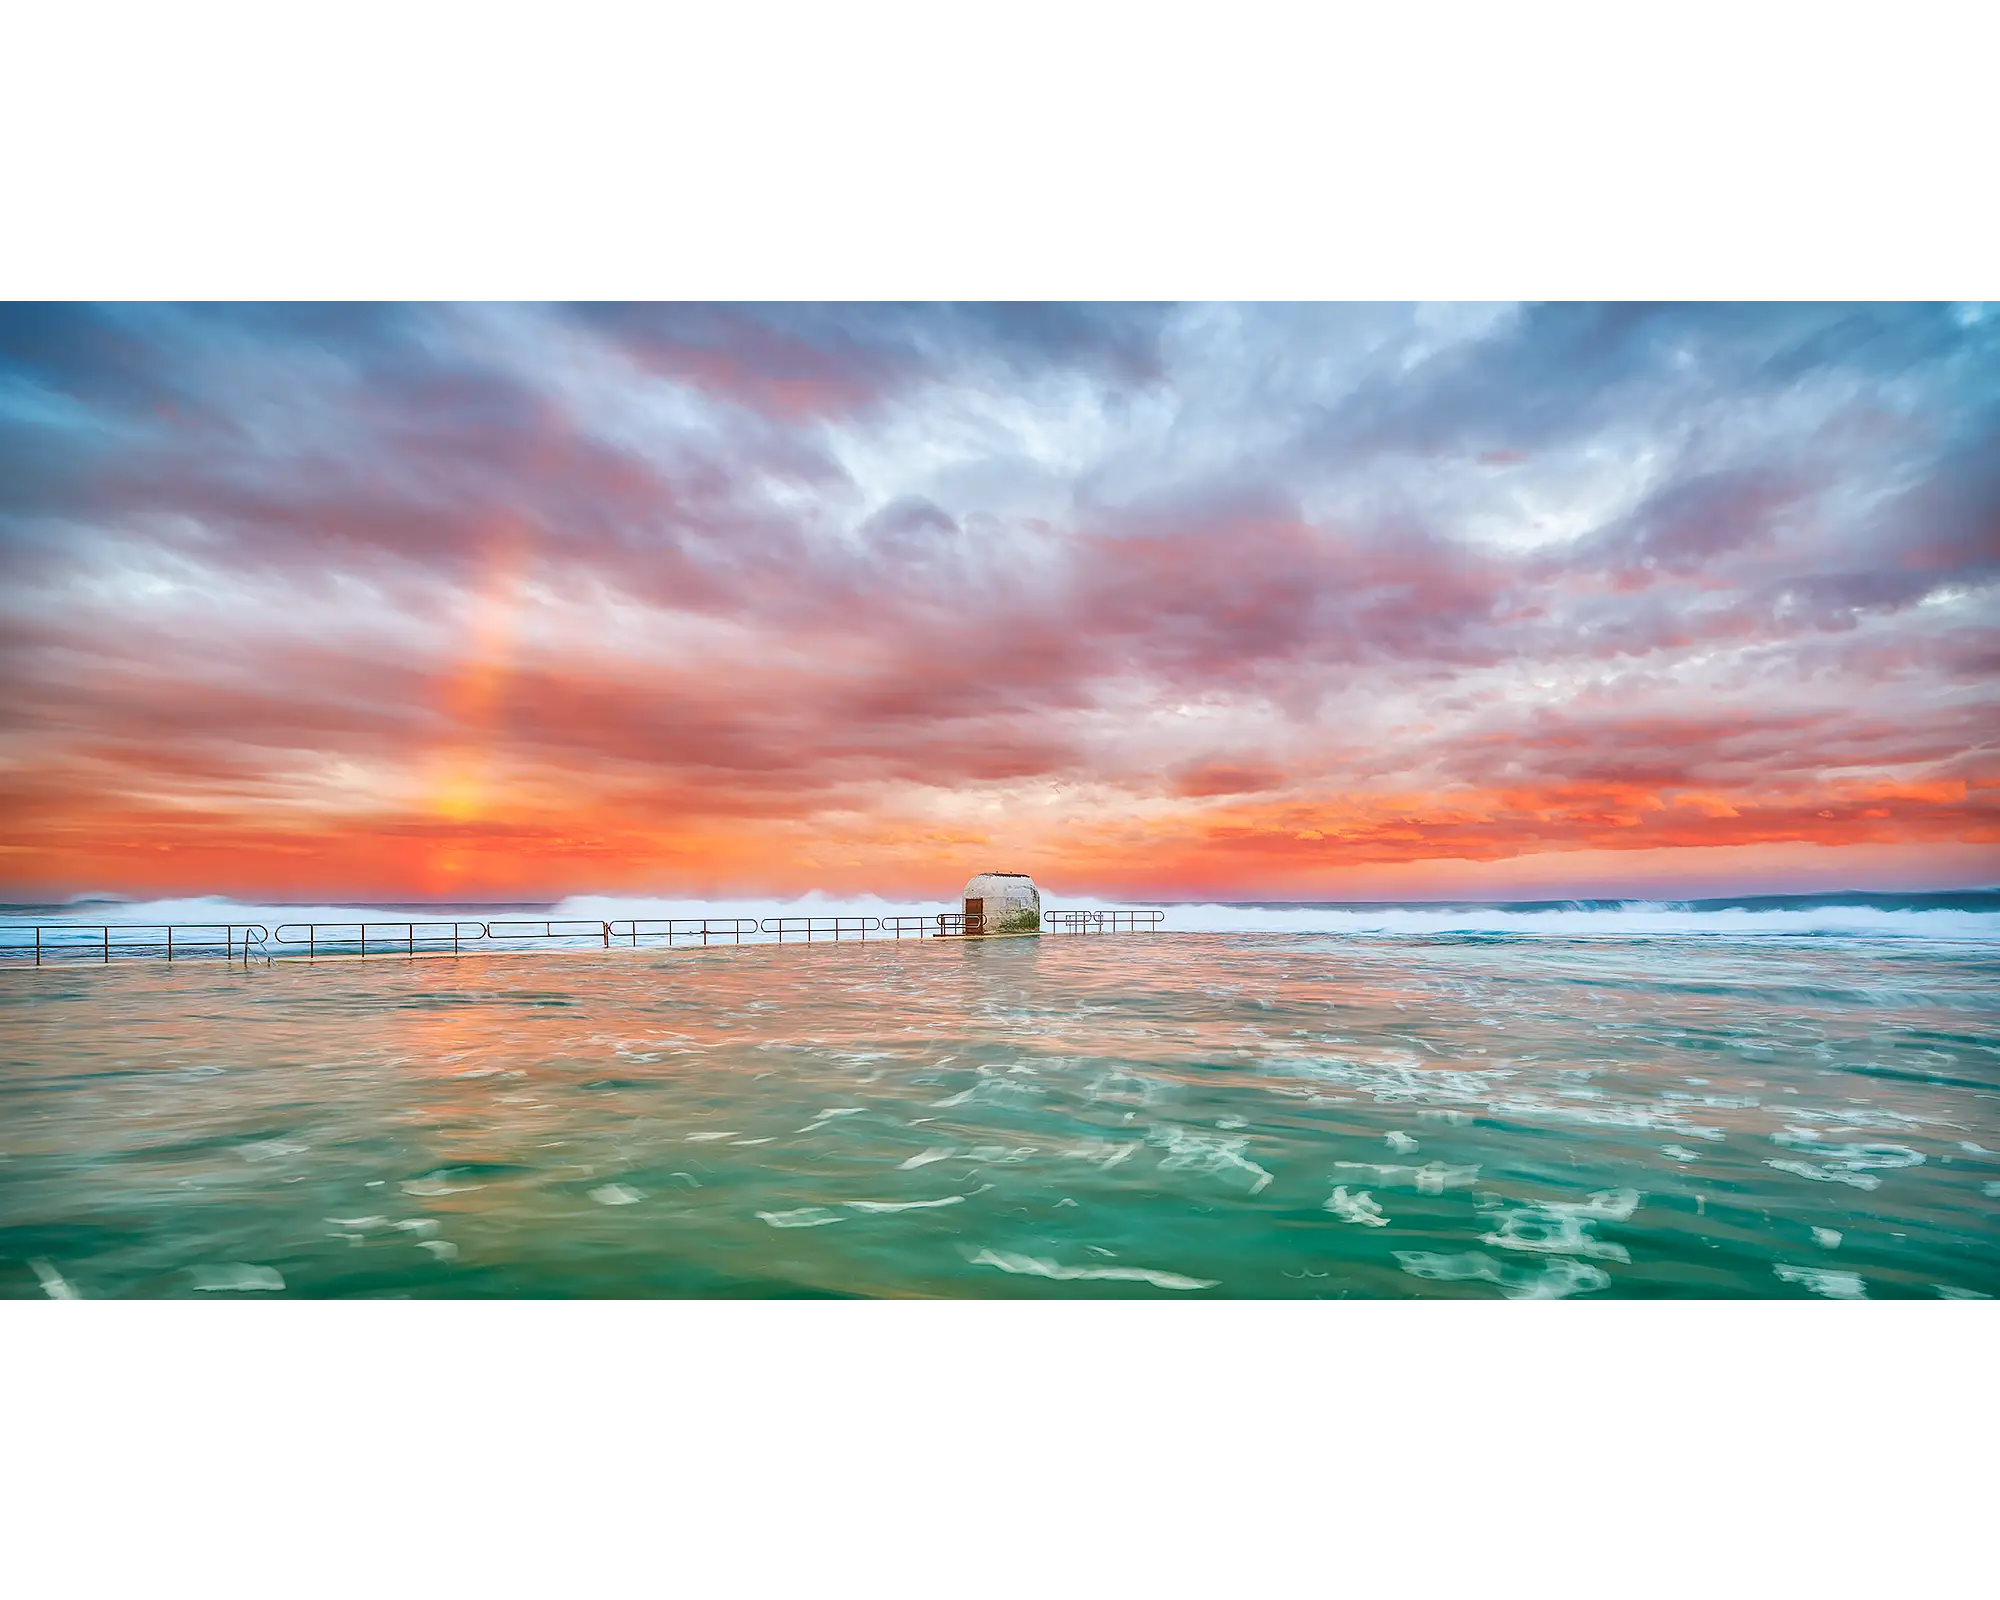 A rainbow and colourful clouds over Merewether Ocean Baths, Newcastle, NSW.